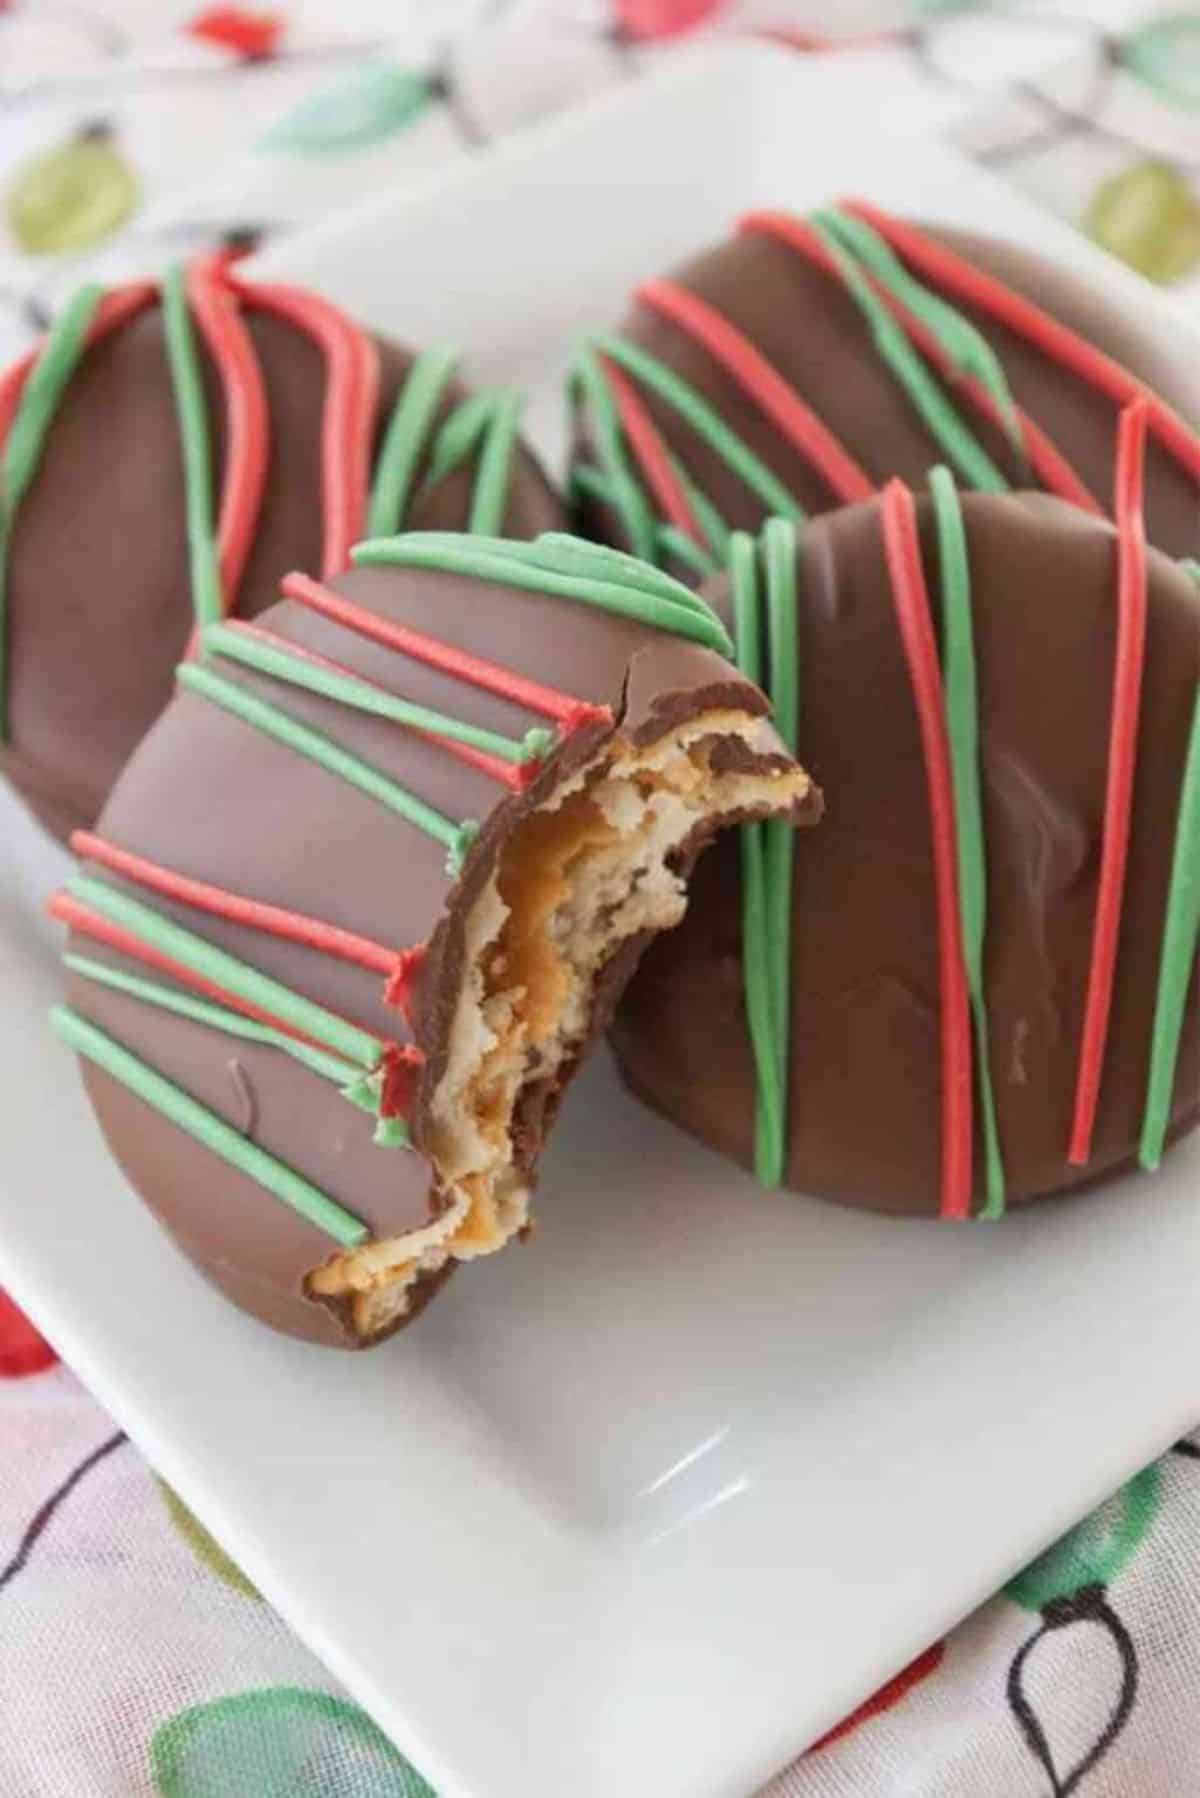 Chocolate Dipped Peanut Butter Ritz Crackers on a white plate.